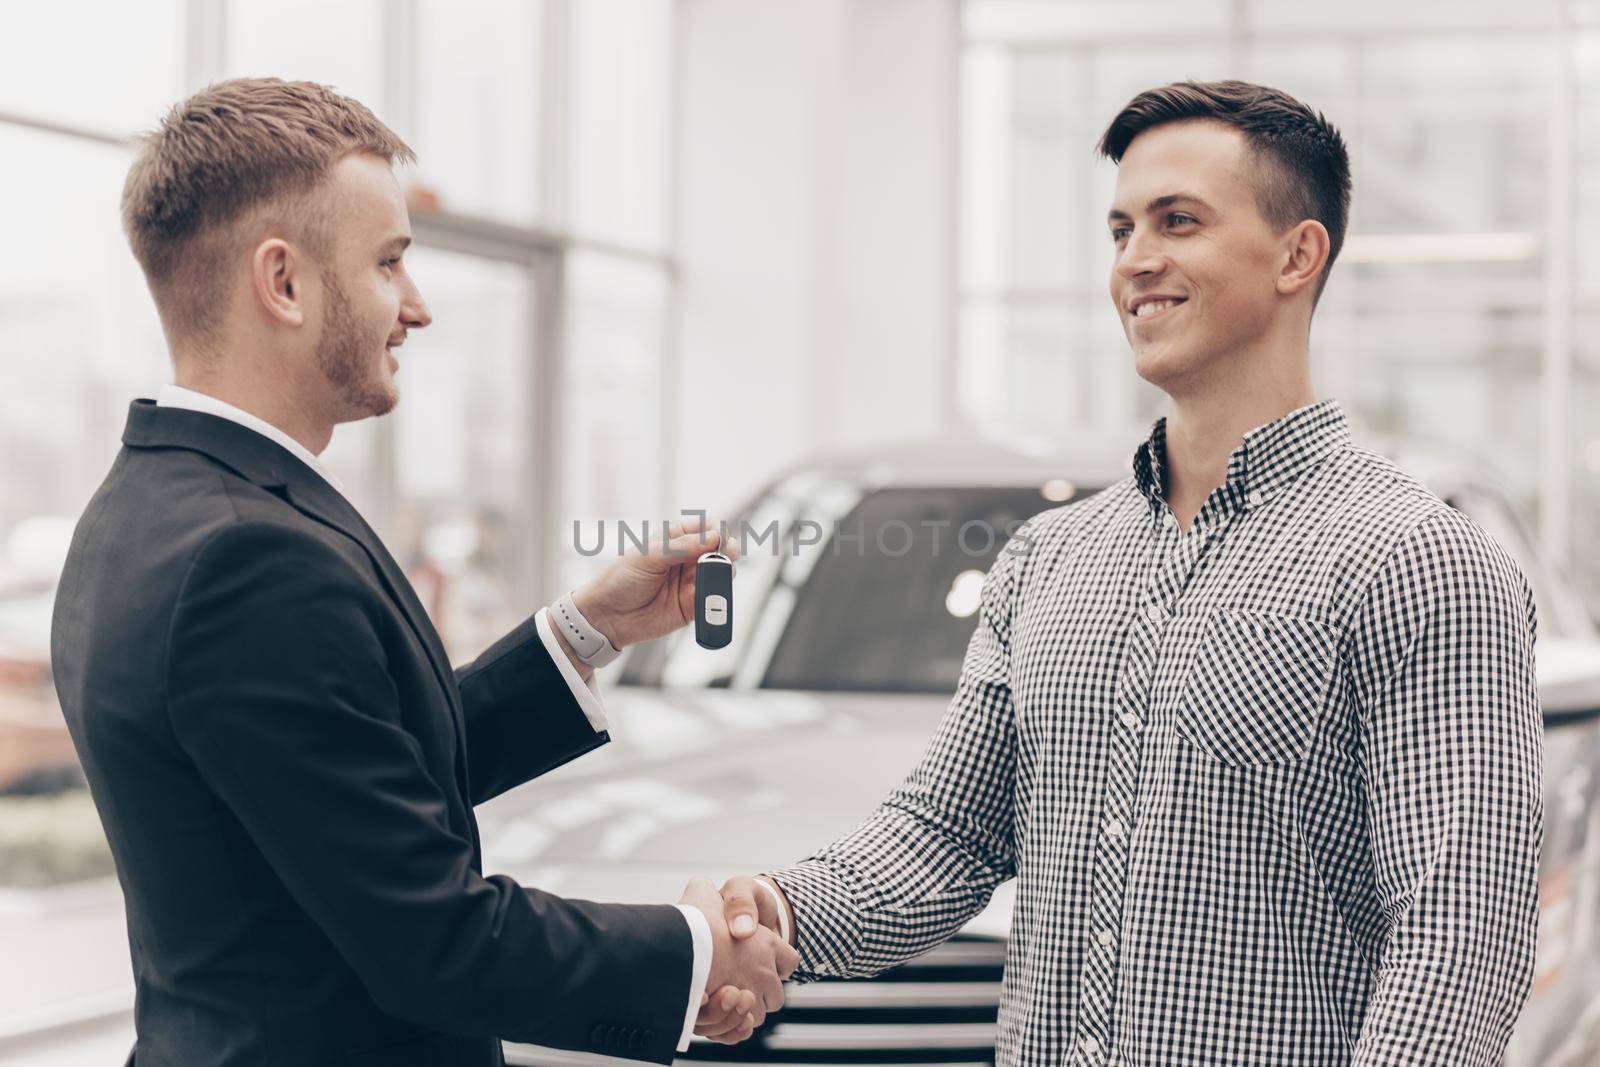 Happy handsome man receiving car keys to his new automobile from car salesman at the dealership. Professional auto seller shaking hands with his customer, handing him keys to a new vehicle. Buying car